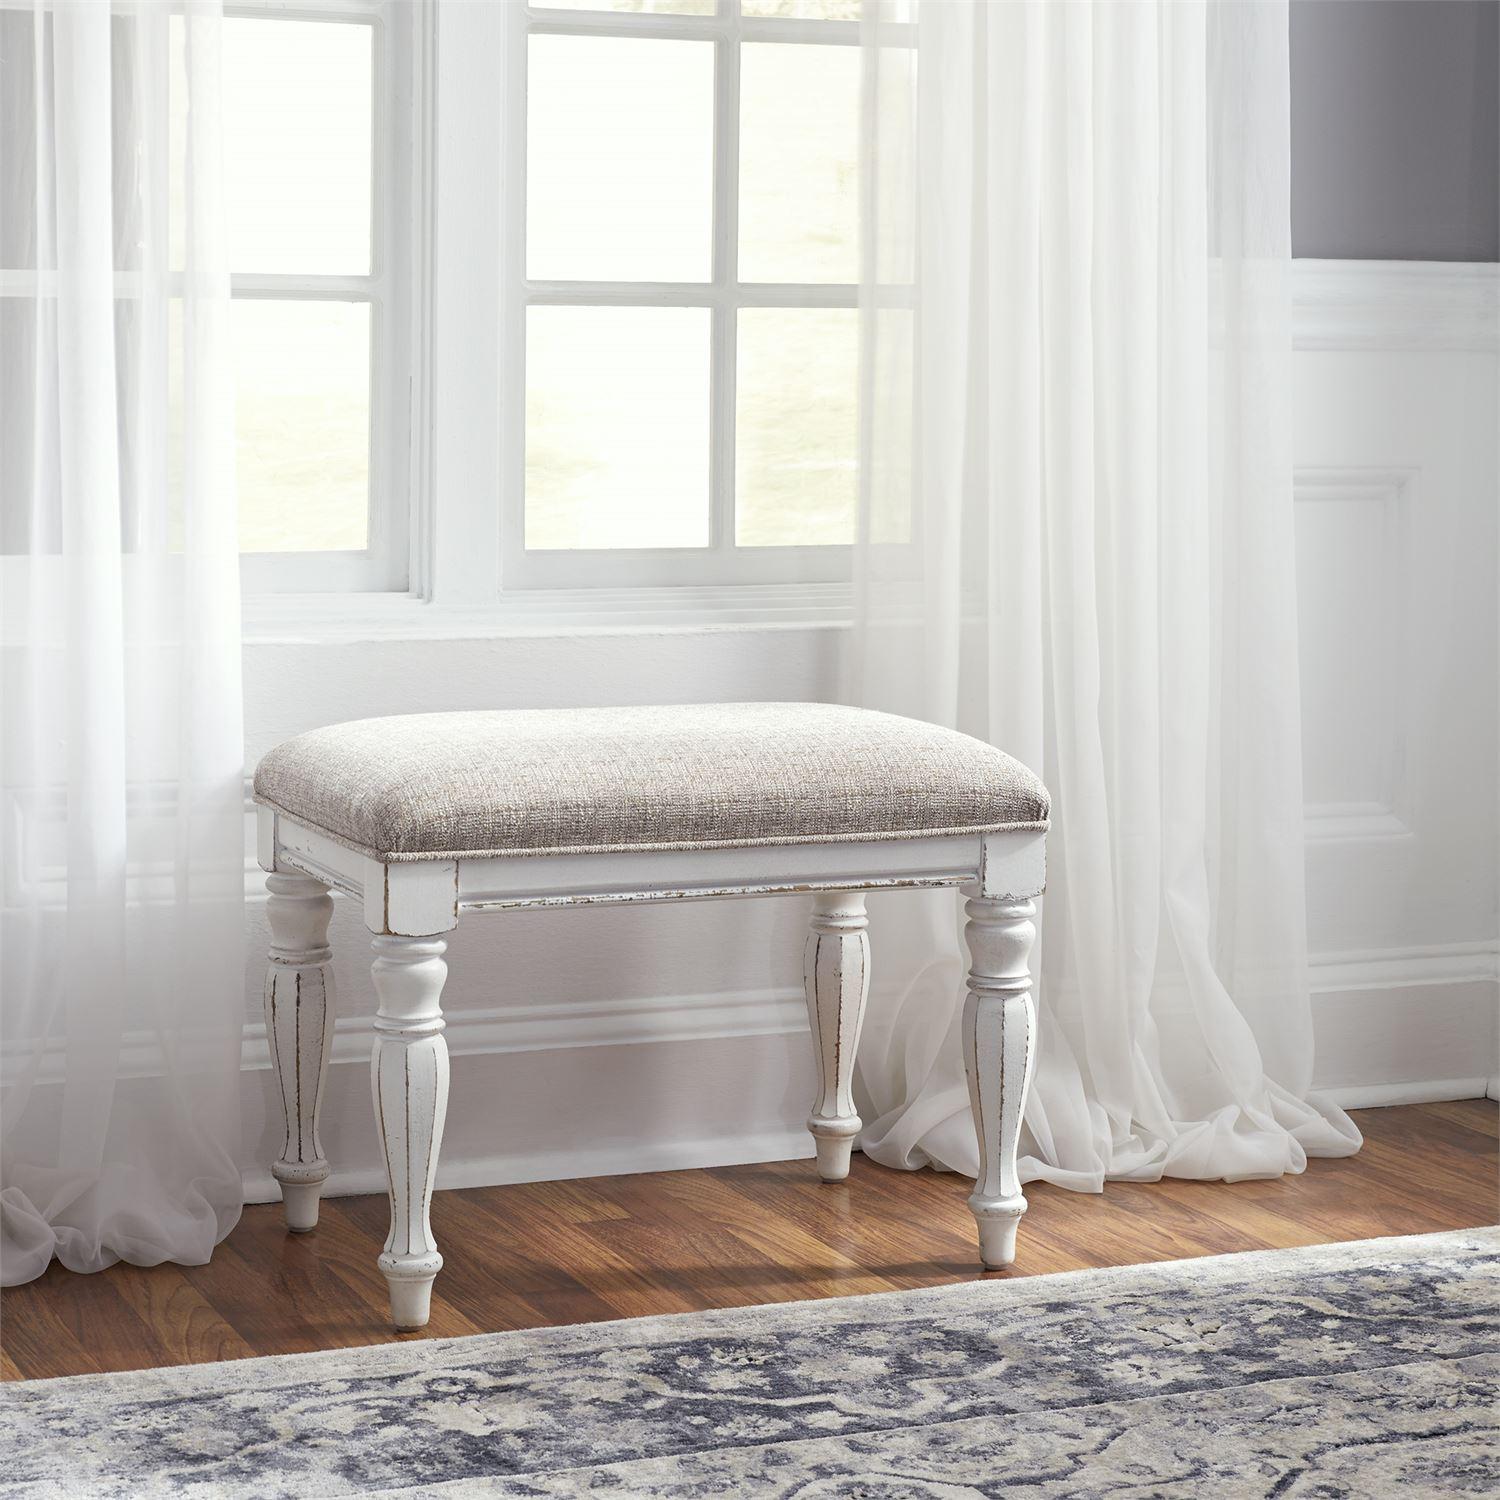 Traditional Bench Magnolia Manor  (244-AT) Bench 244-AB9001 in White Chenille